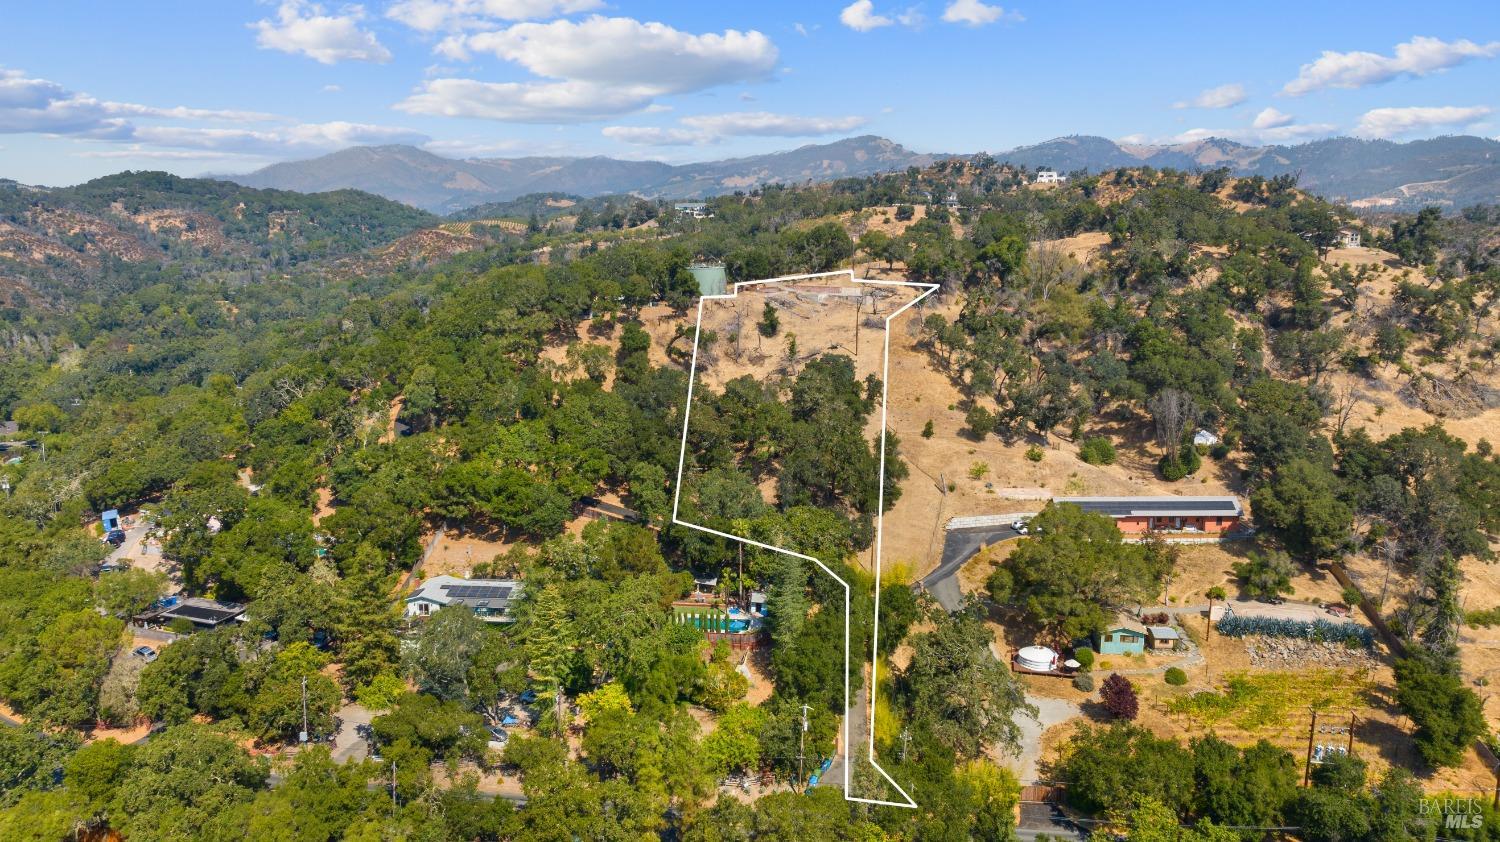 Build your dream home above Warm Springs Road in Glen Ellen on 1.48 acres. Sweeping views of nearby Sonoma Mountain with the Mayacamas Mountains and San Pablo Bay in the distance. Includes public water, public sewer, electricity, and plans for a 1,855 SF home.  Easy access to shopping and dining in Glen Ellen, and close proximity to wineries and parks in Sonoma Valley, Jack London State Historical Park, and Regional Park. Located approximately 1 hour north of San Francisco and 40 minutes from Sonoma County Airport in Santa Rosa.  Sale includes APN 054-230-036, .65 acres and APN 054-230-035, .83 acres.